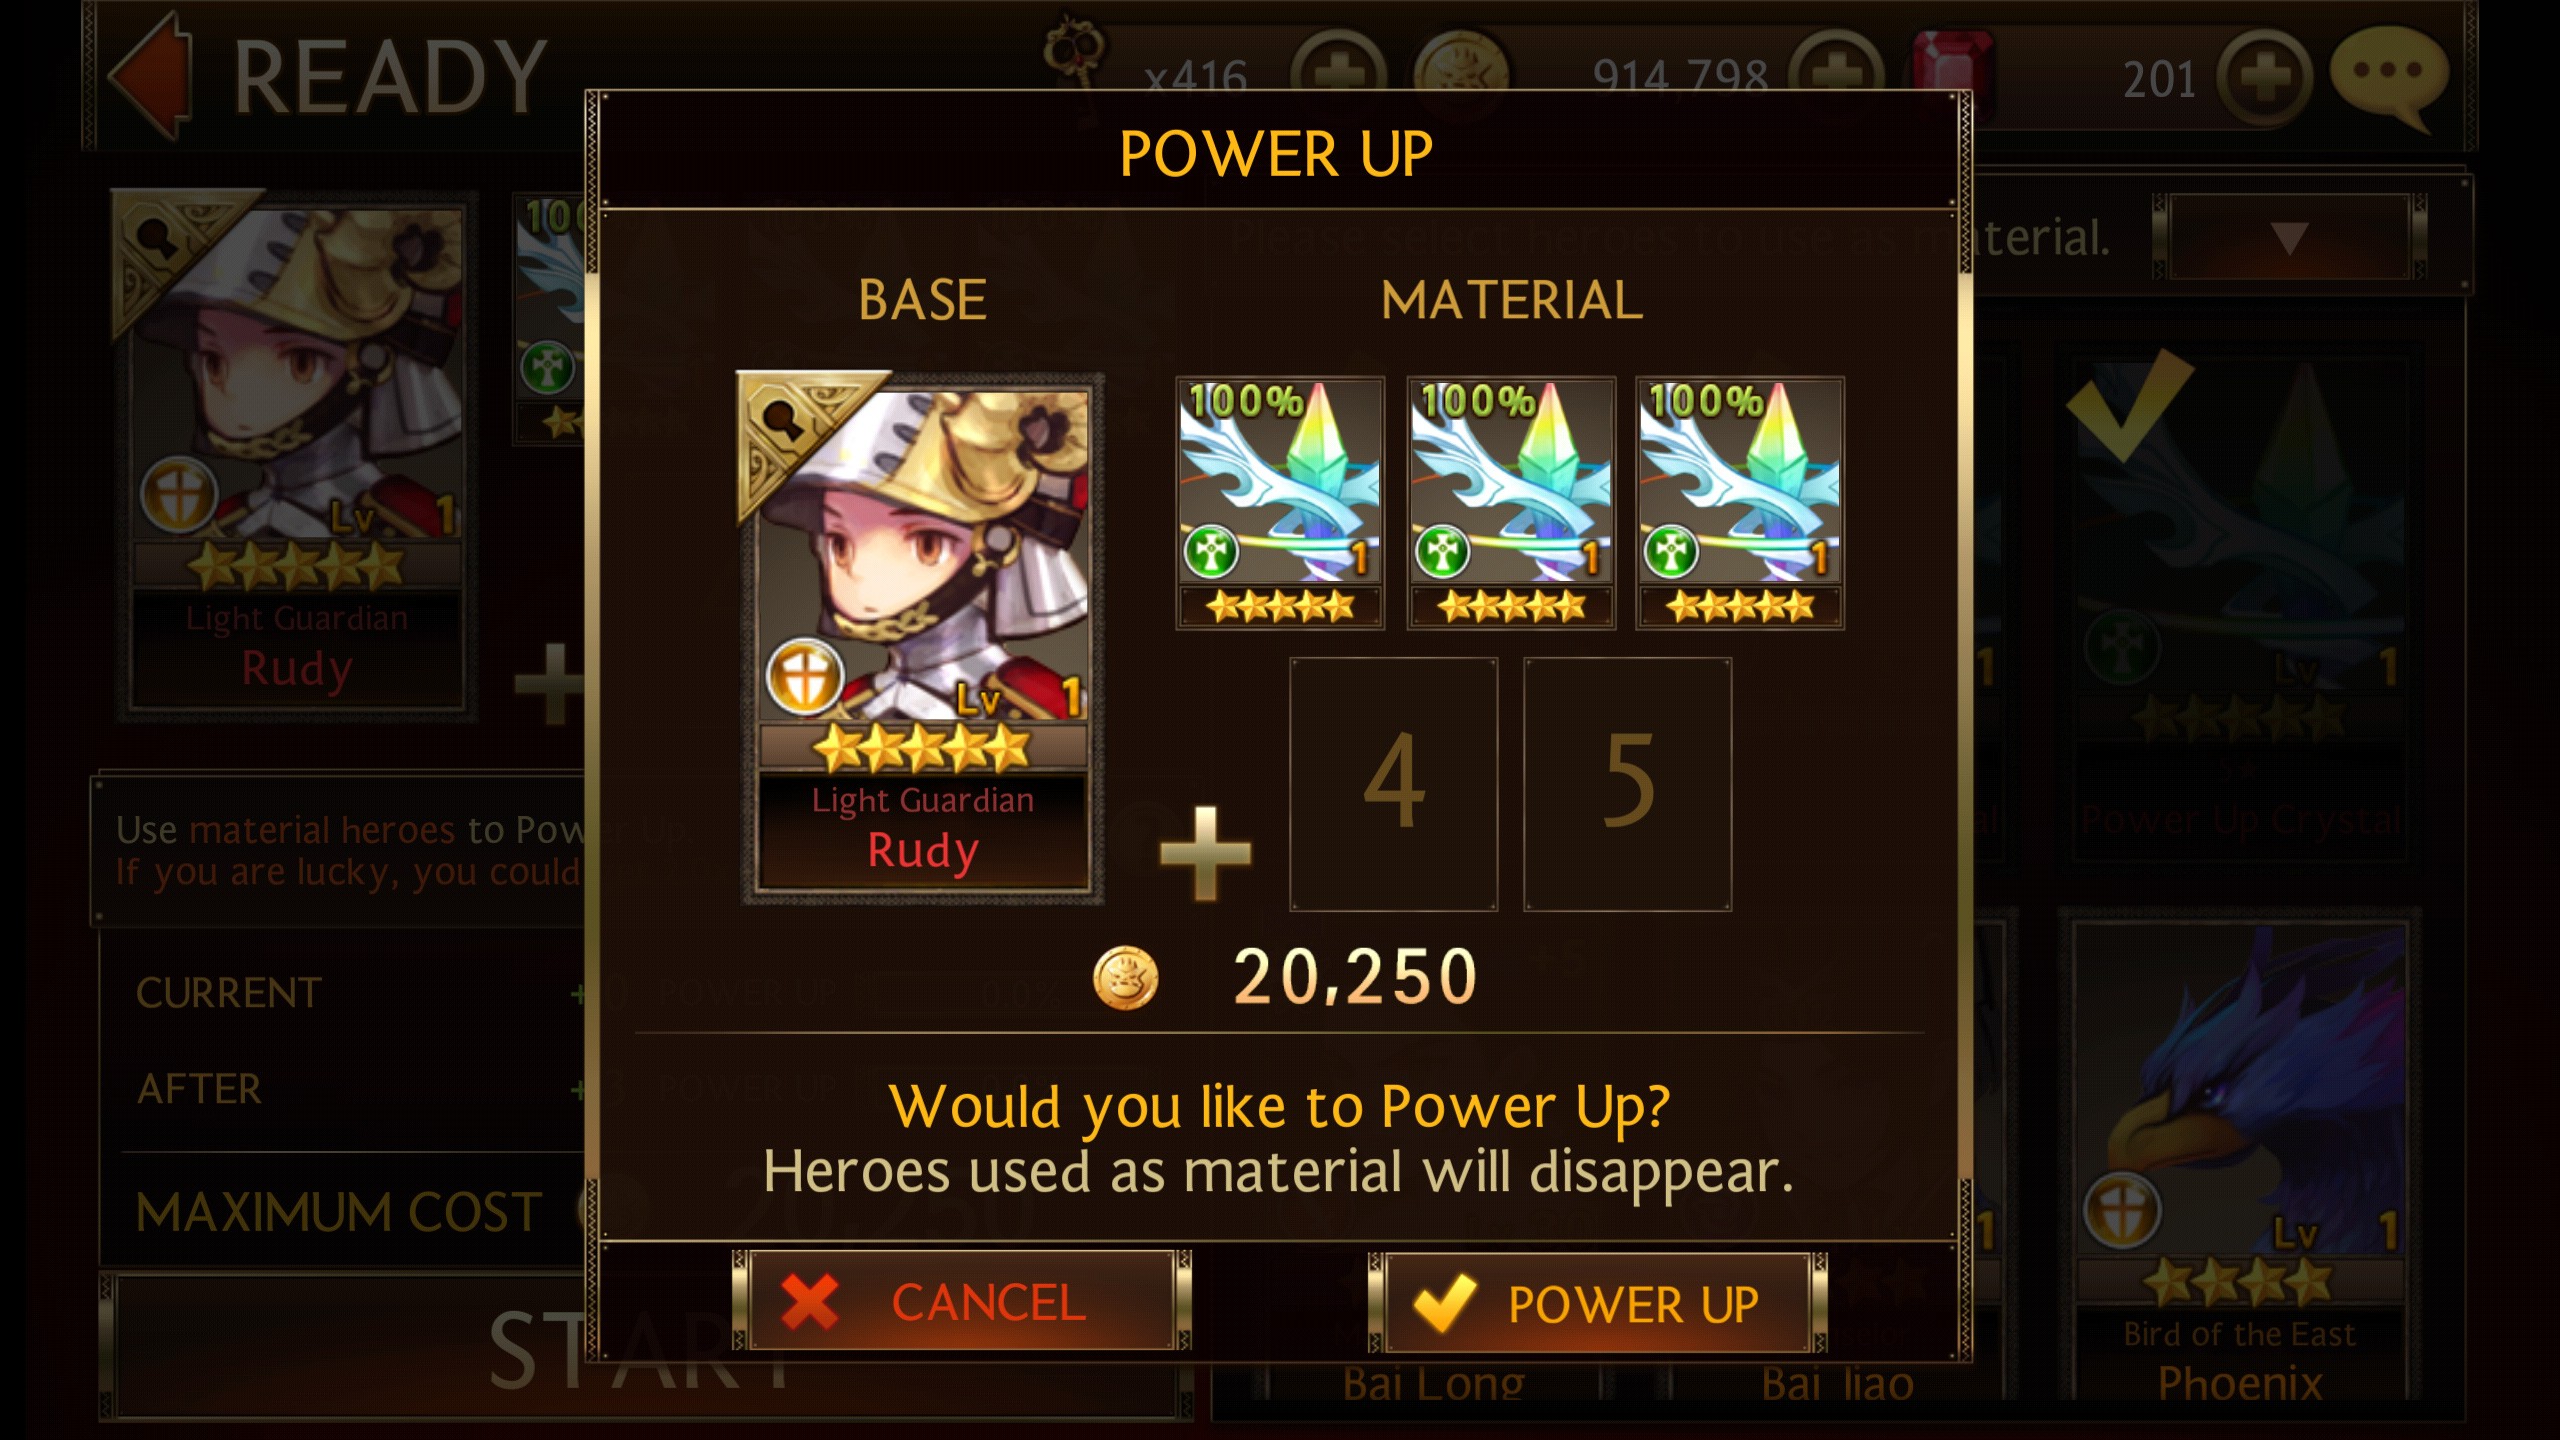 How to Power Up Seven Knights Heroes